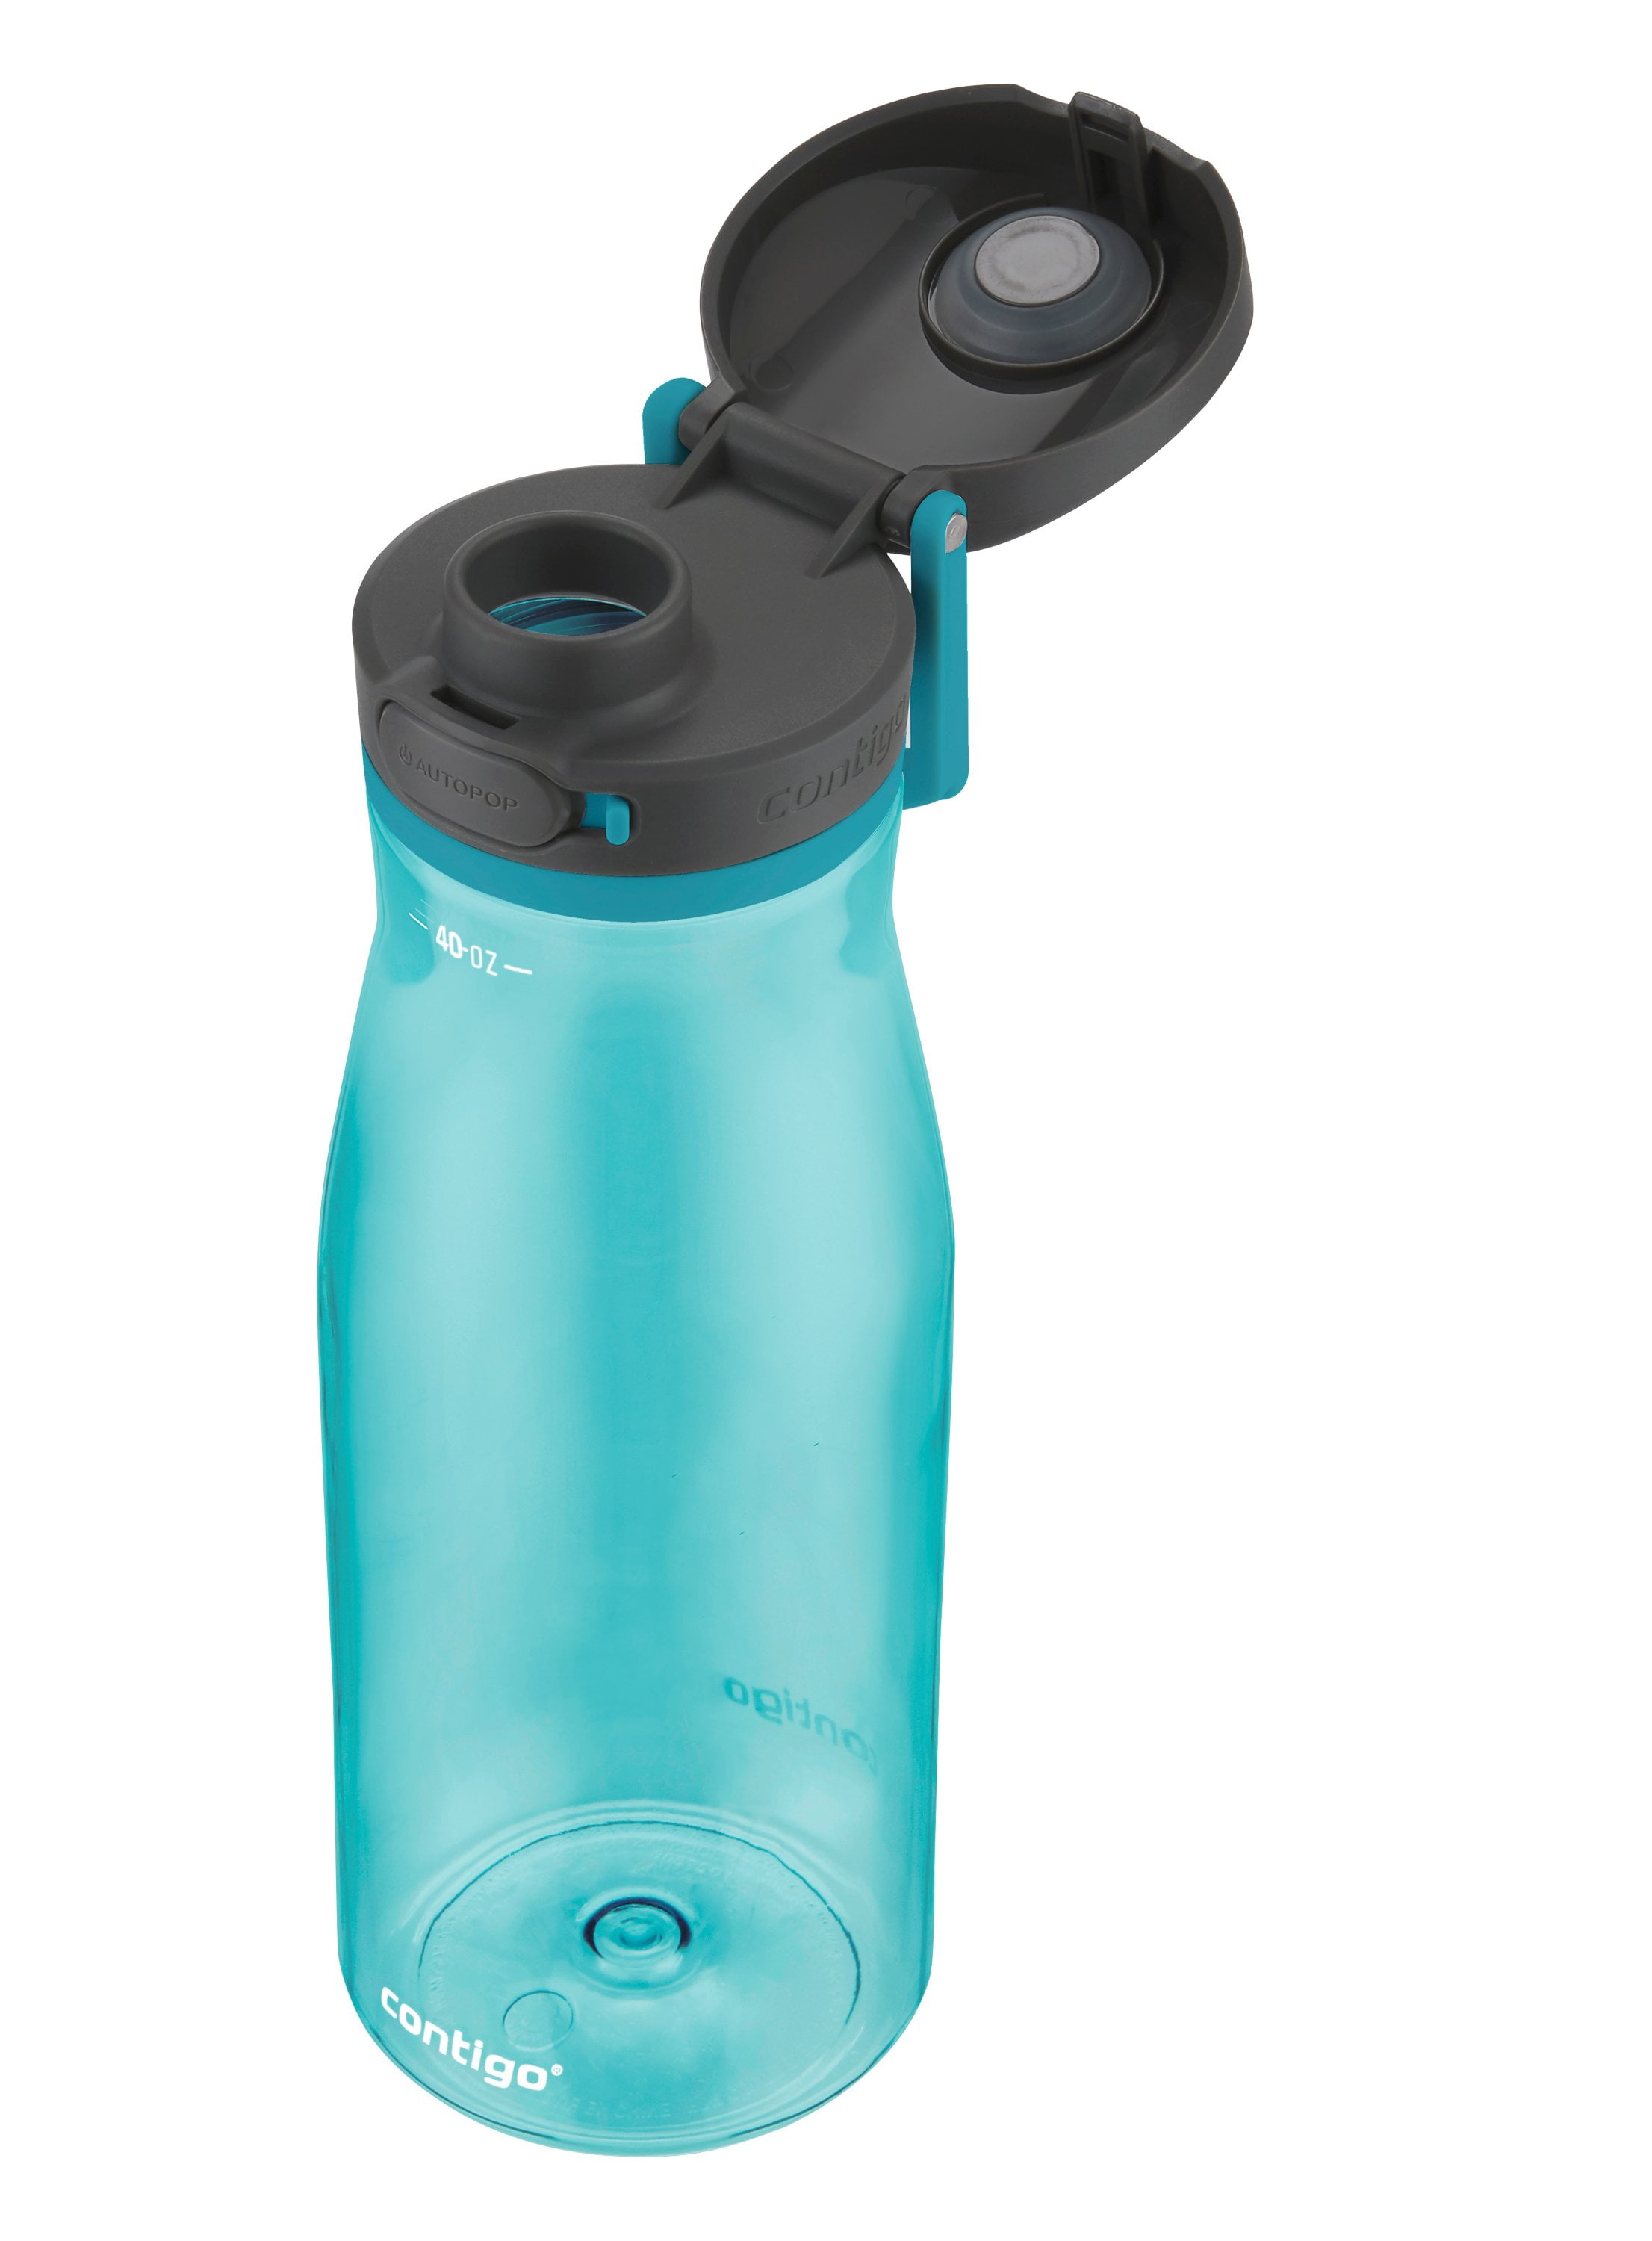 Contigo Jackson 2.0 BPA-Free Plastic Water Bottle with Leak-Proof Lid, Chug  Mouth Design with Interc…See more Contigo Jackson 2.0 BPA-Free Plastic